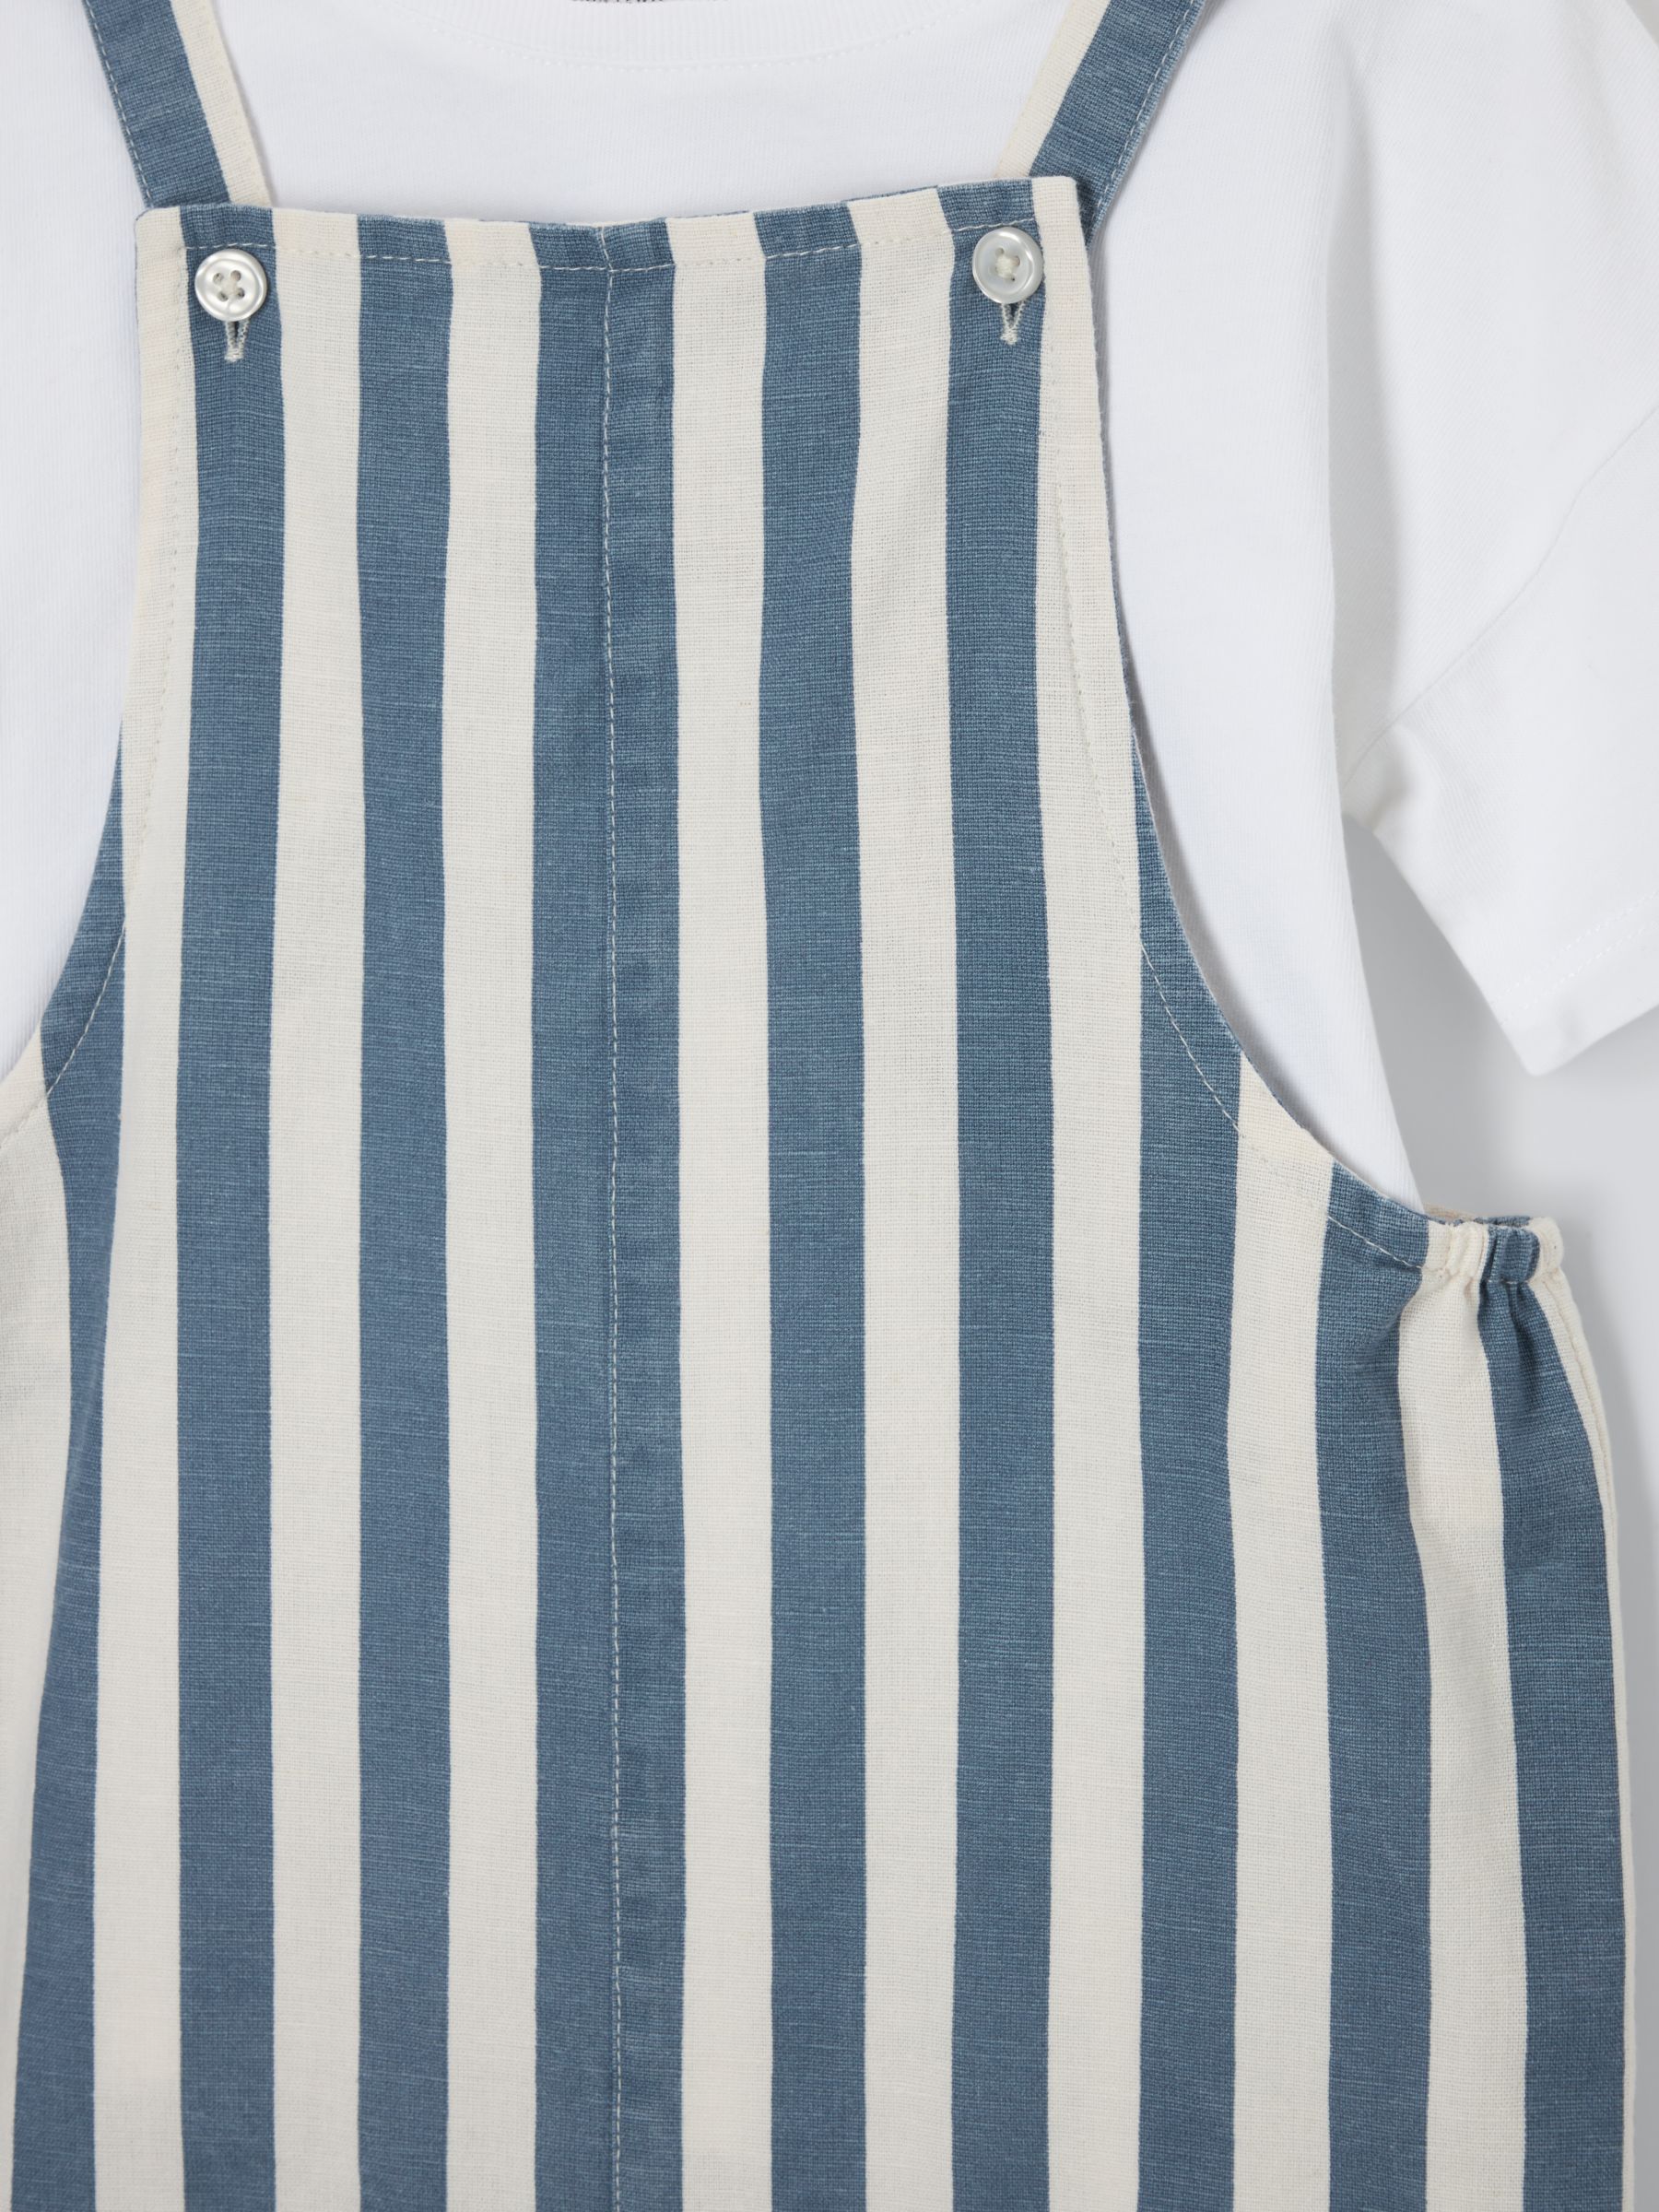 Buy John Lewis ANYDAY Baby Cotton T-Shirt and Linen Blend Stripe Dungarees Online at johnlewis.com